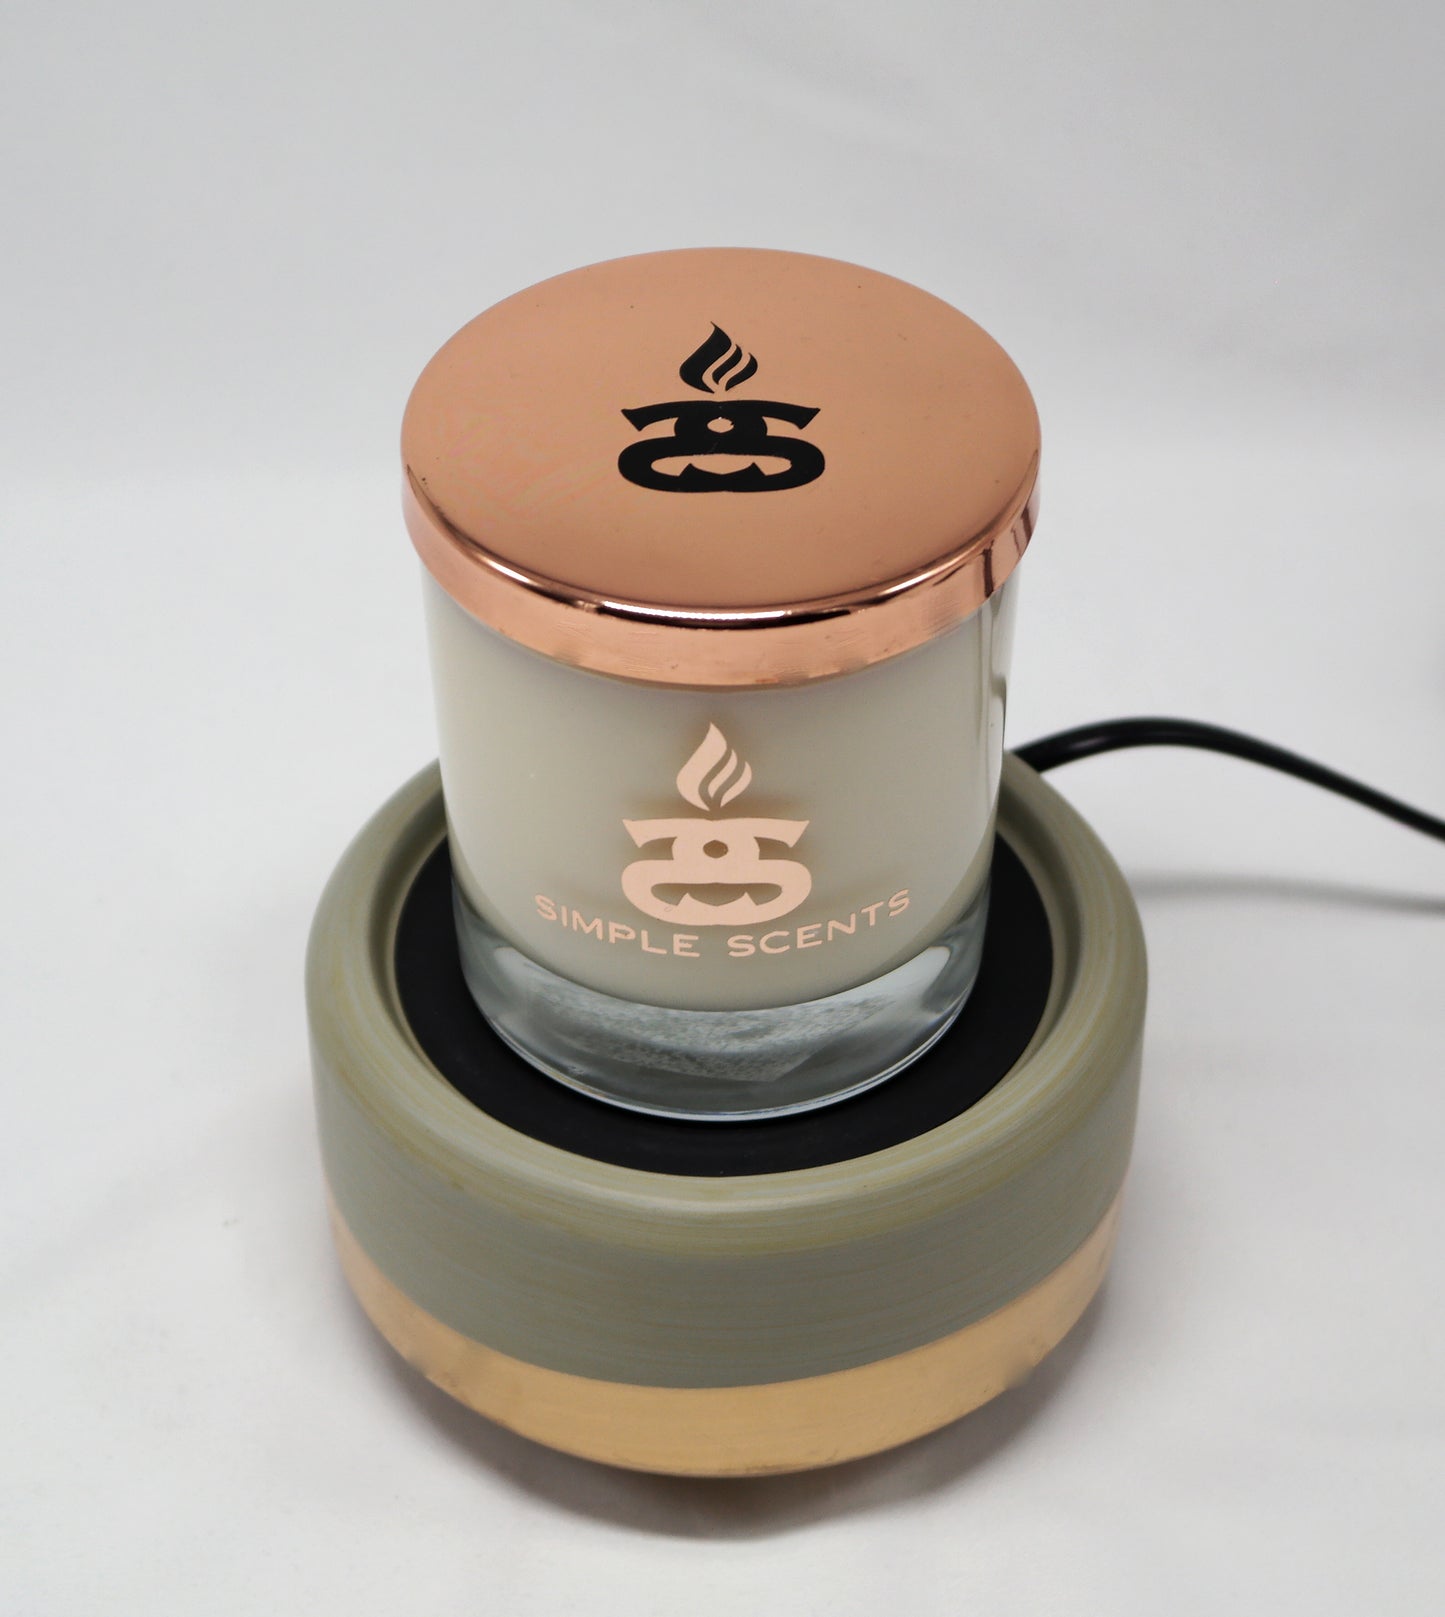 Grey & Rose Gold Electric Ceramic Wax Melter & Candle Warmer hot plate with Simple Scents 200g candle with Rose Gold lid